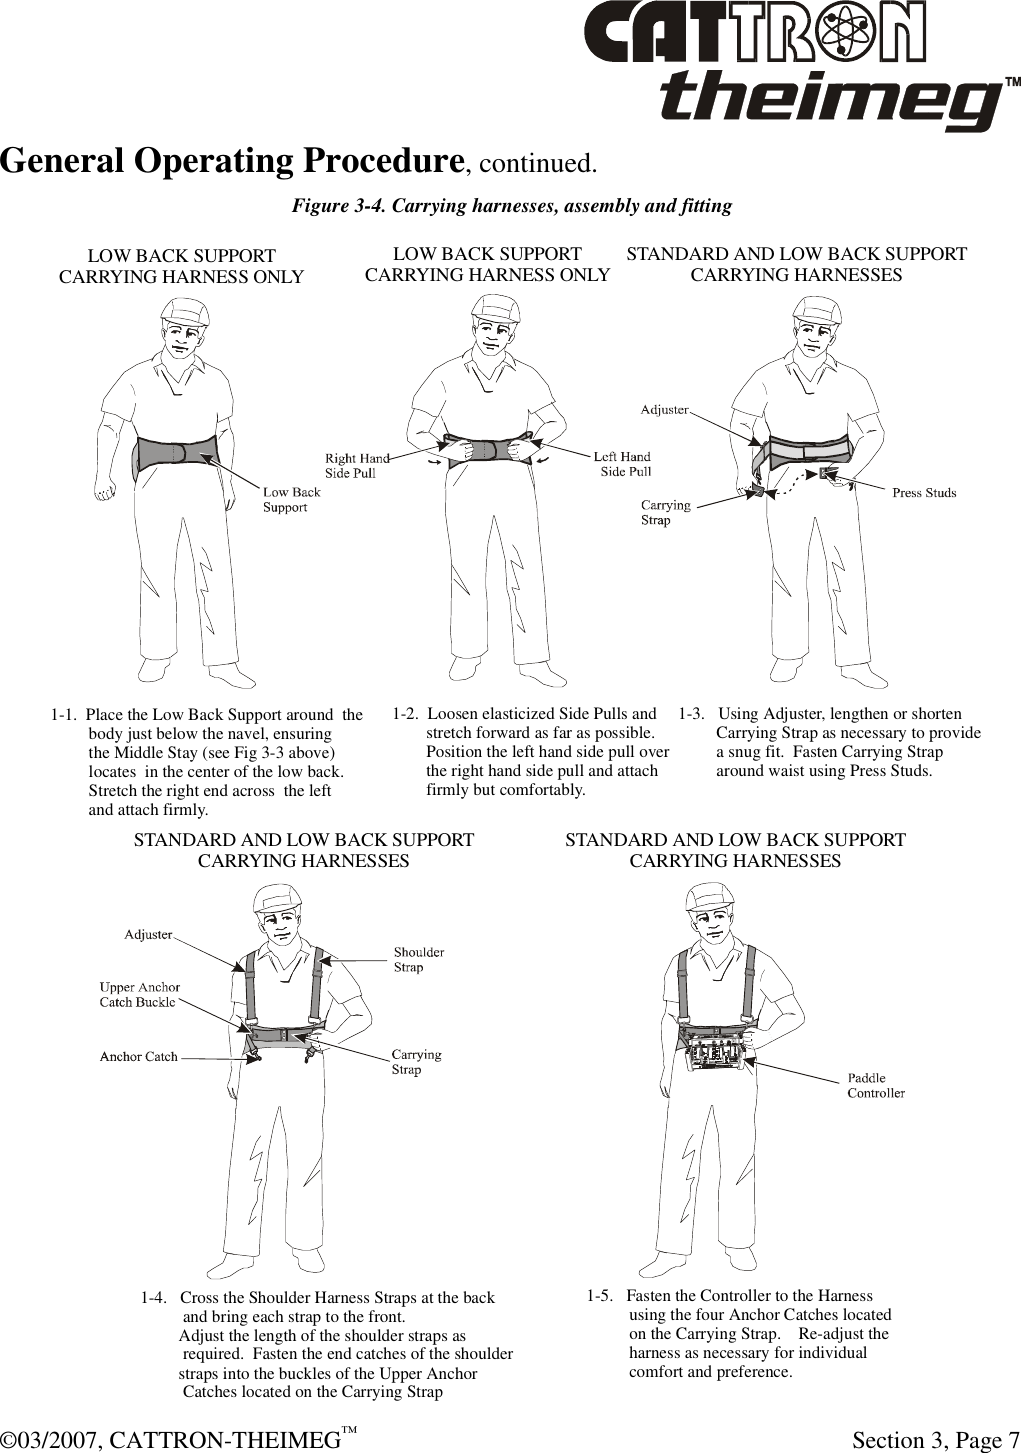  ©03/2007, CATTRON-THEIMEG™     Section 3, Page 7 General Operating Procedure, continued.   Figure 3-4. Carrying harnesses, assembly and fitting 1-1.  Place the Low Back Support around  the         body just below the navel, ensuring         the Middle Stay (see Fig 3-3 above)         locates  in the center of the low back.         Stretch the right end across  the left         and attach firmly.1-2.  Loosen elasticized Side Pulls and        stretch forward as far as possible.        Position the left hand side pull over        the right hand side pull and attach        firmly but comfortably.1-3.   Using Adjuster, lengthen or shorten         Carrying Strap as necessary to provide         a snug fit.  Fasten Carrying Strap         around waist using Press Studs.1-4.   Cross the Shoulder Harness Straps at the back          and bring each strap to the front.         Adjust the length of the shoulder straps as          required.  Fasten the end catches of the shoulder         straps into the buckles of the Upper Anchor          Catches located on the Carrying Strap 1-5.   Fasten the Controller to the Harness          using the four Anchor Catches located          on the Carrying Strap.    Re-adjust the          harness as necessary for individual          comfort and preference.        LOW BACK SUPPORTCARRYING HARNESS ONLYSTANDARD AND LOW BACK SUPPORTCARRYING HARNESSESSTANDARD AND LOW BACK SUPPORTCARRYING HARNESSESSTANDARD AND LOW BACK SUPPORTCARRYING HARNESSESLOW BACK SUPPORTCARRYING HARNESS ONLY